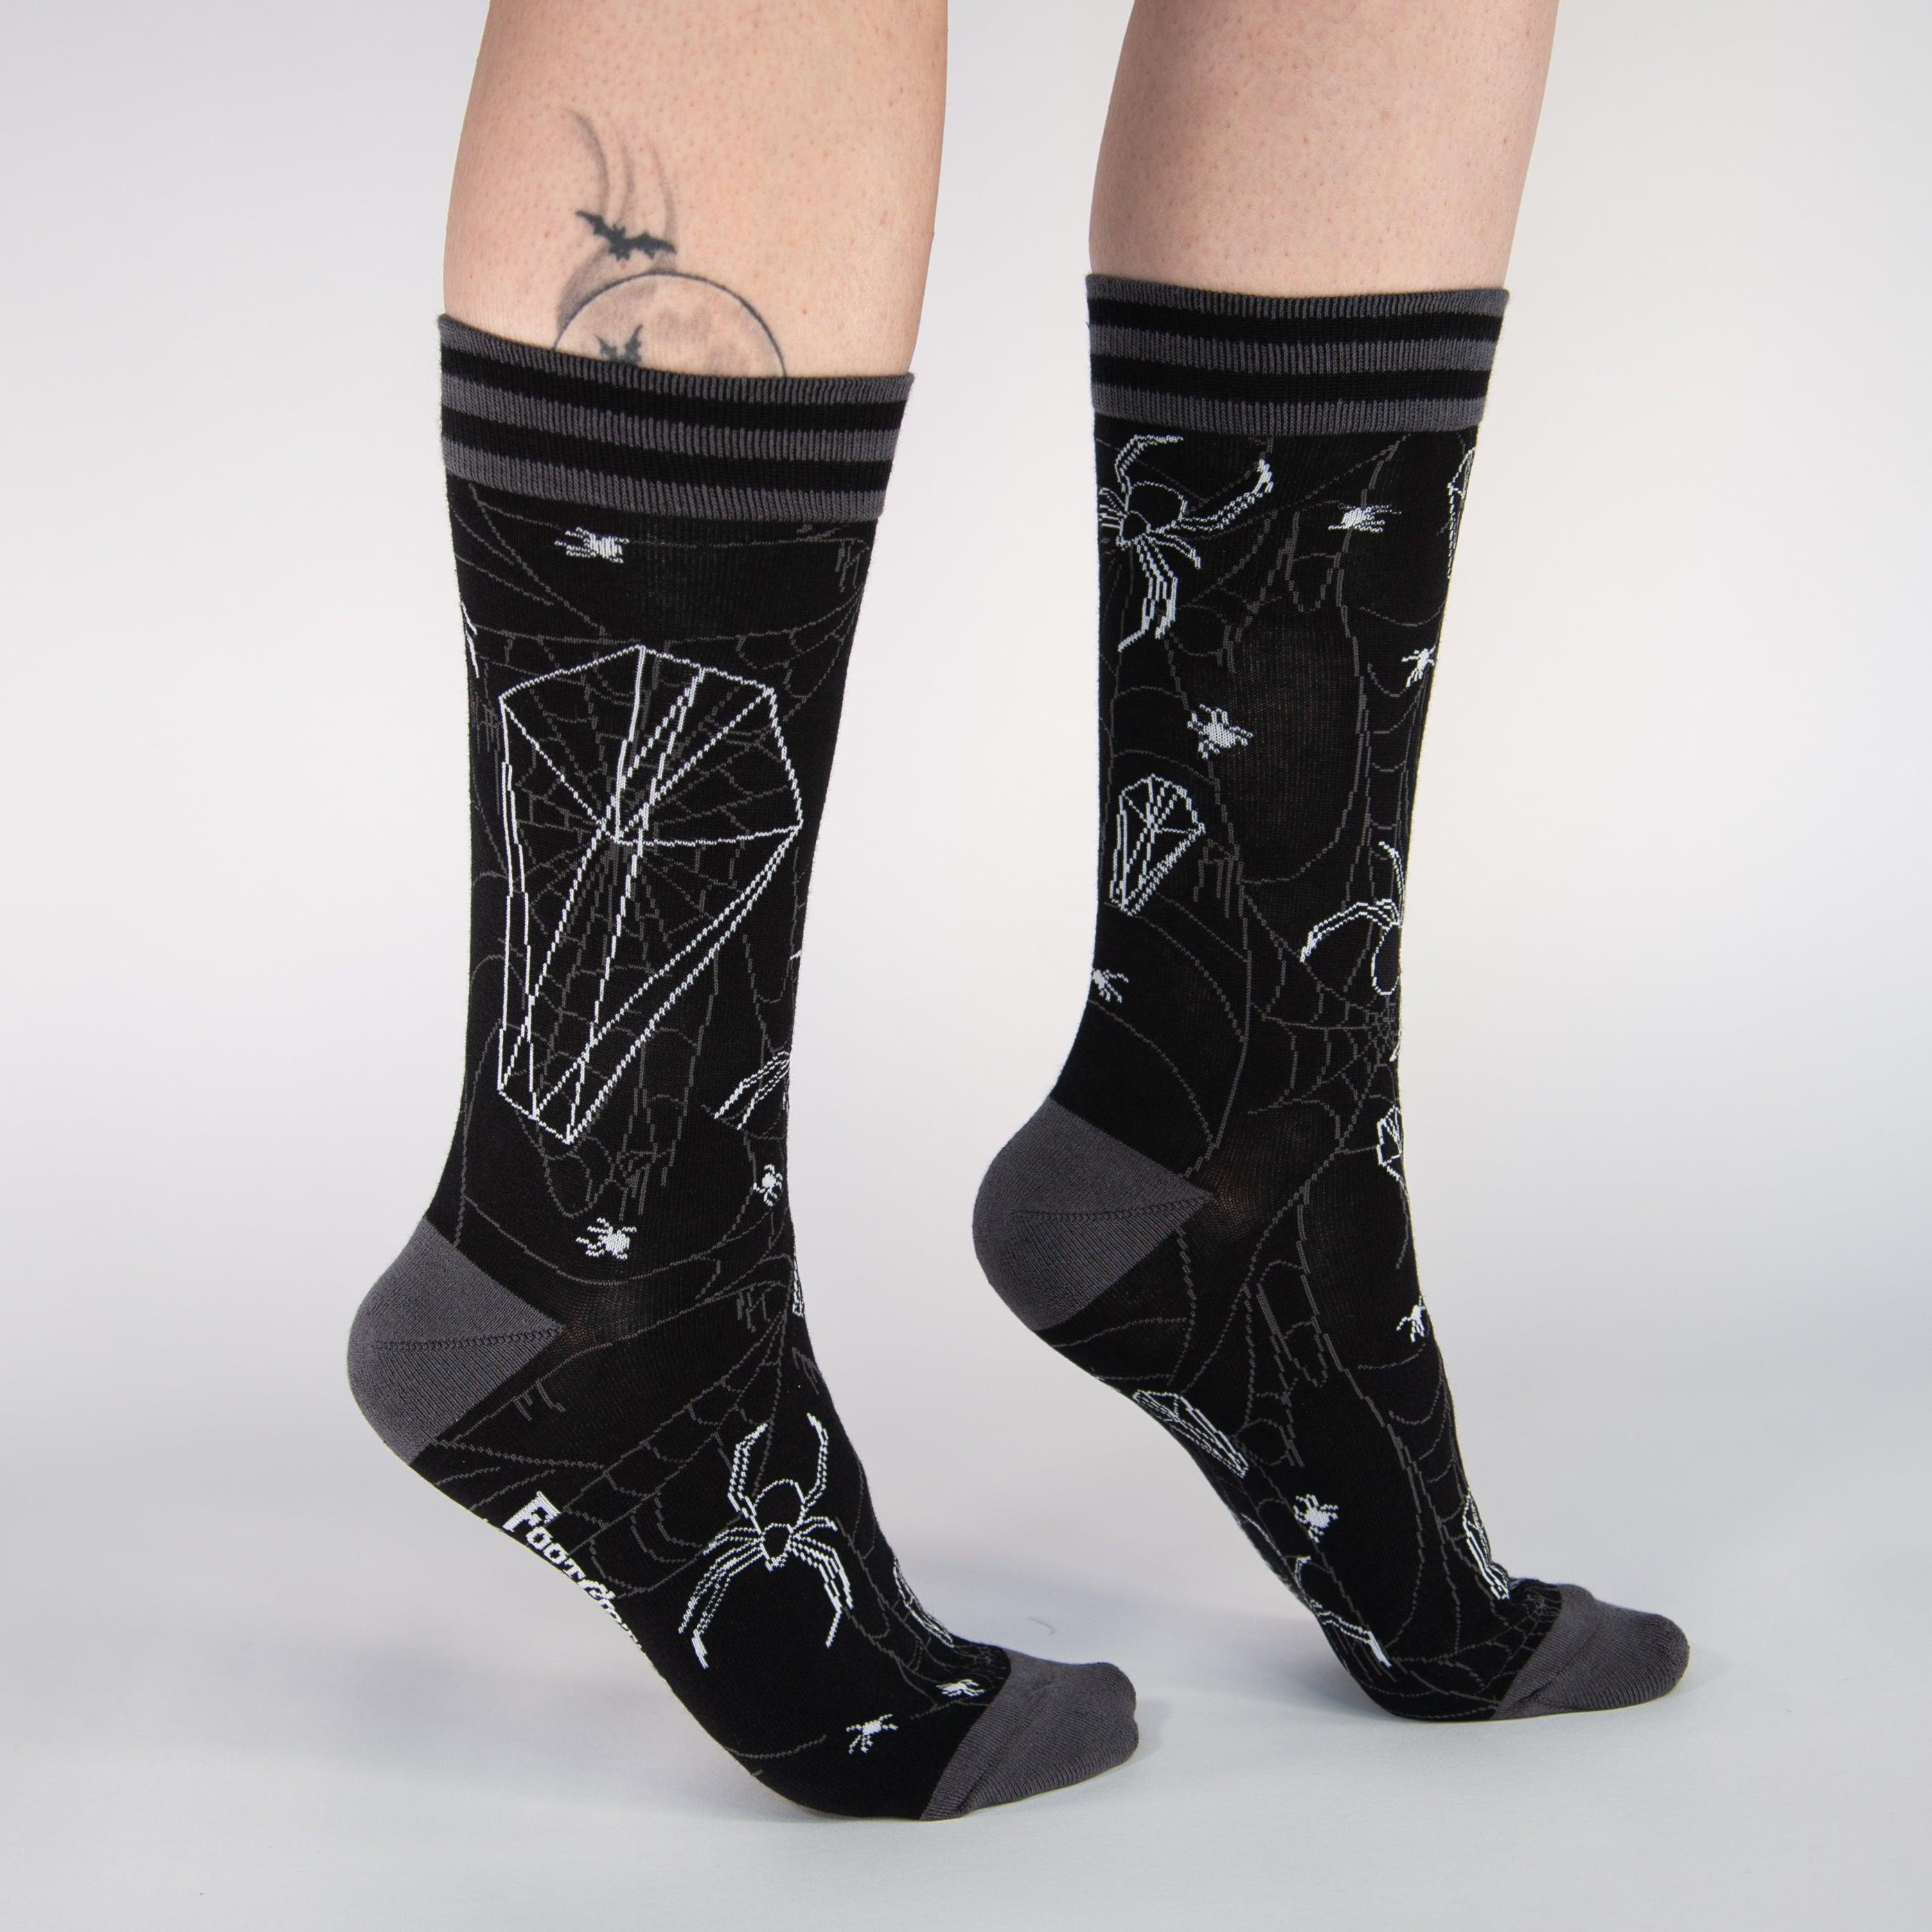 I Just Really Like Spiders, OK? FootClothes x DWYBO Crew Socks - FootClothes